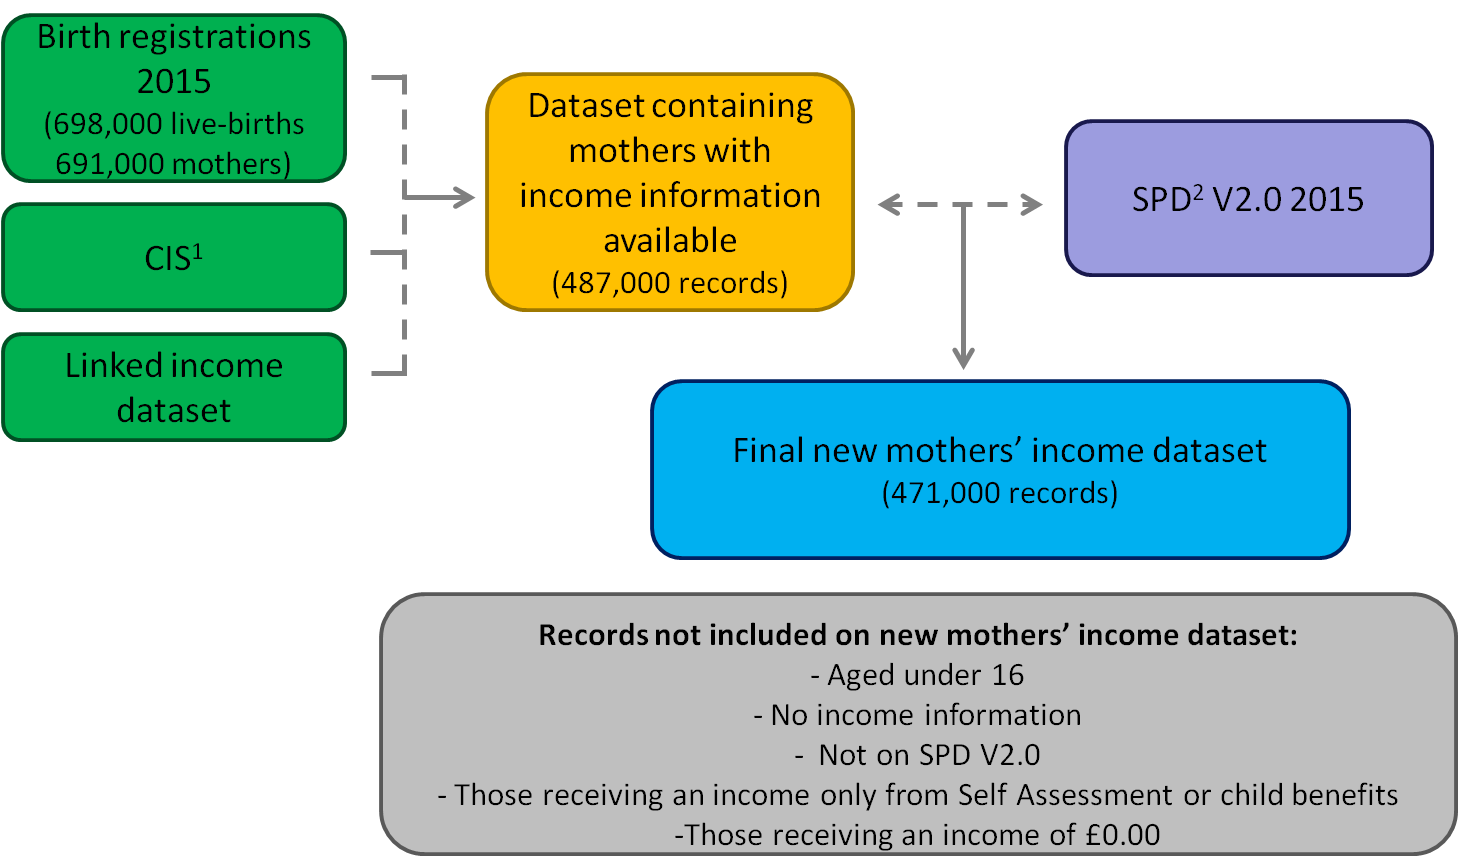 Administrative datasets were linked to SPD version 2 to create the final mothers' income dataset